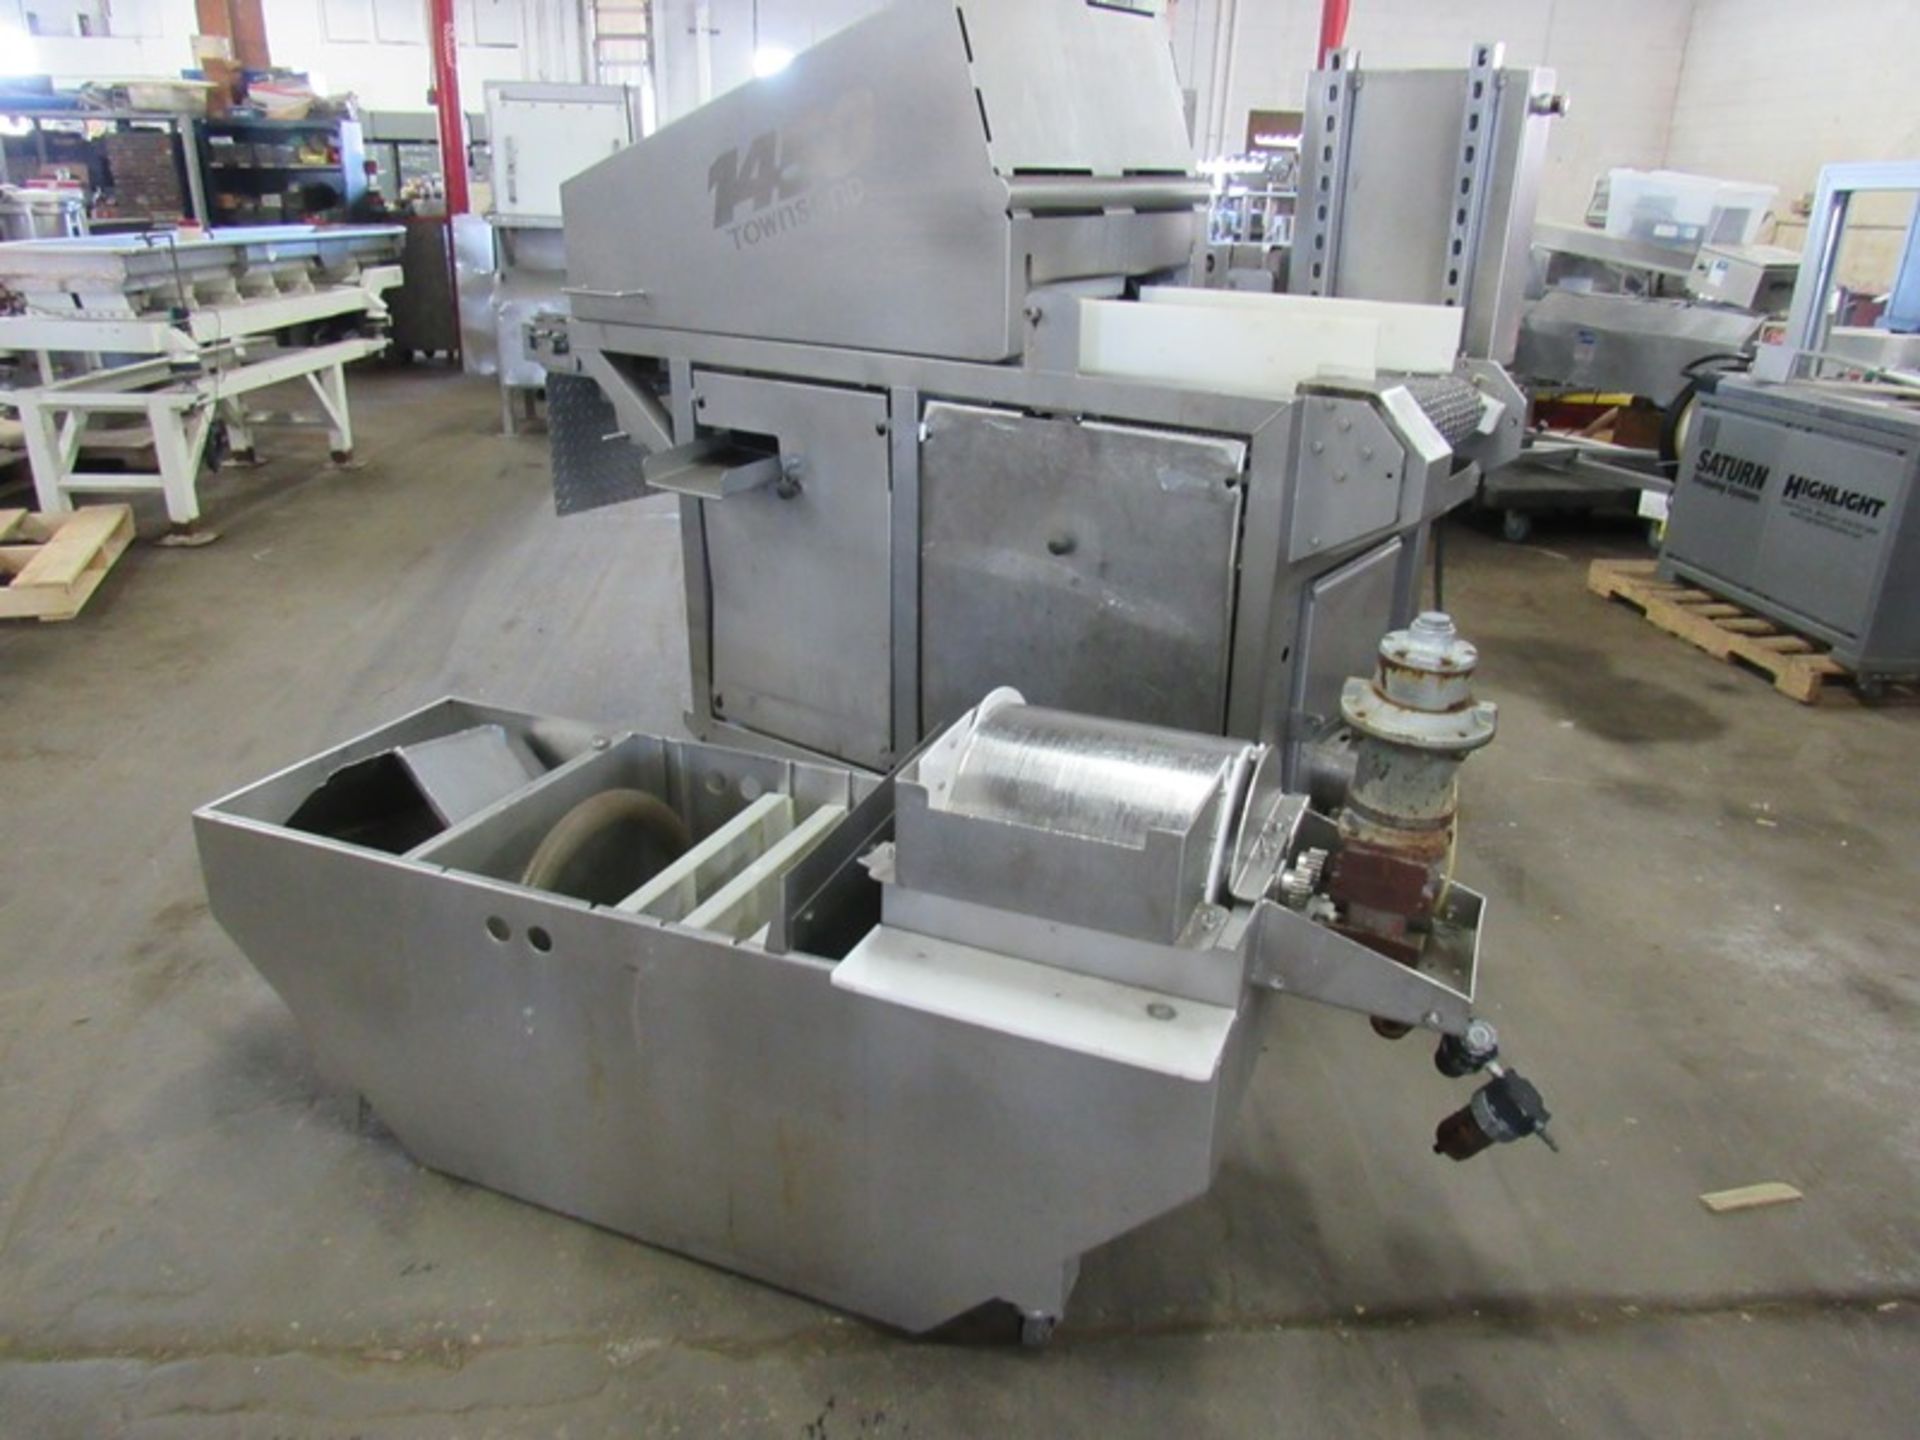 Townsend Mdl. 1450 Injector, 170 needle, 14" W X 6' H stainless steel belt conveyor with stainless